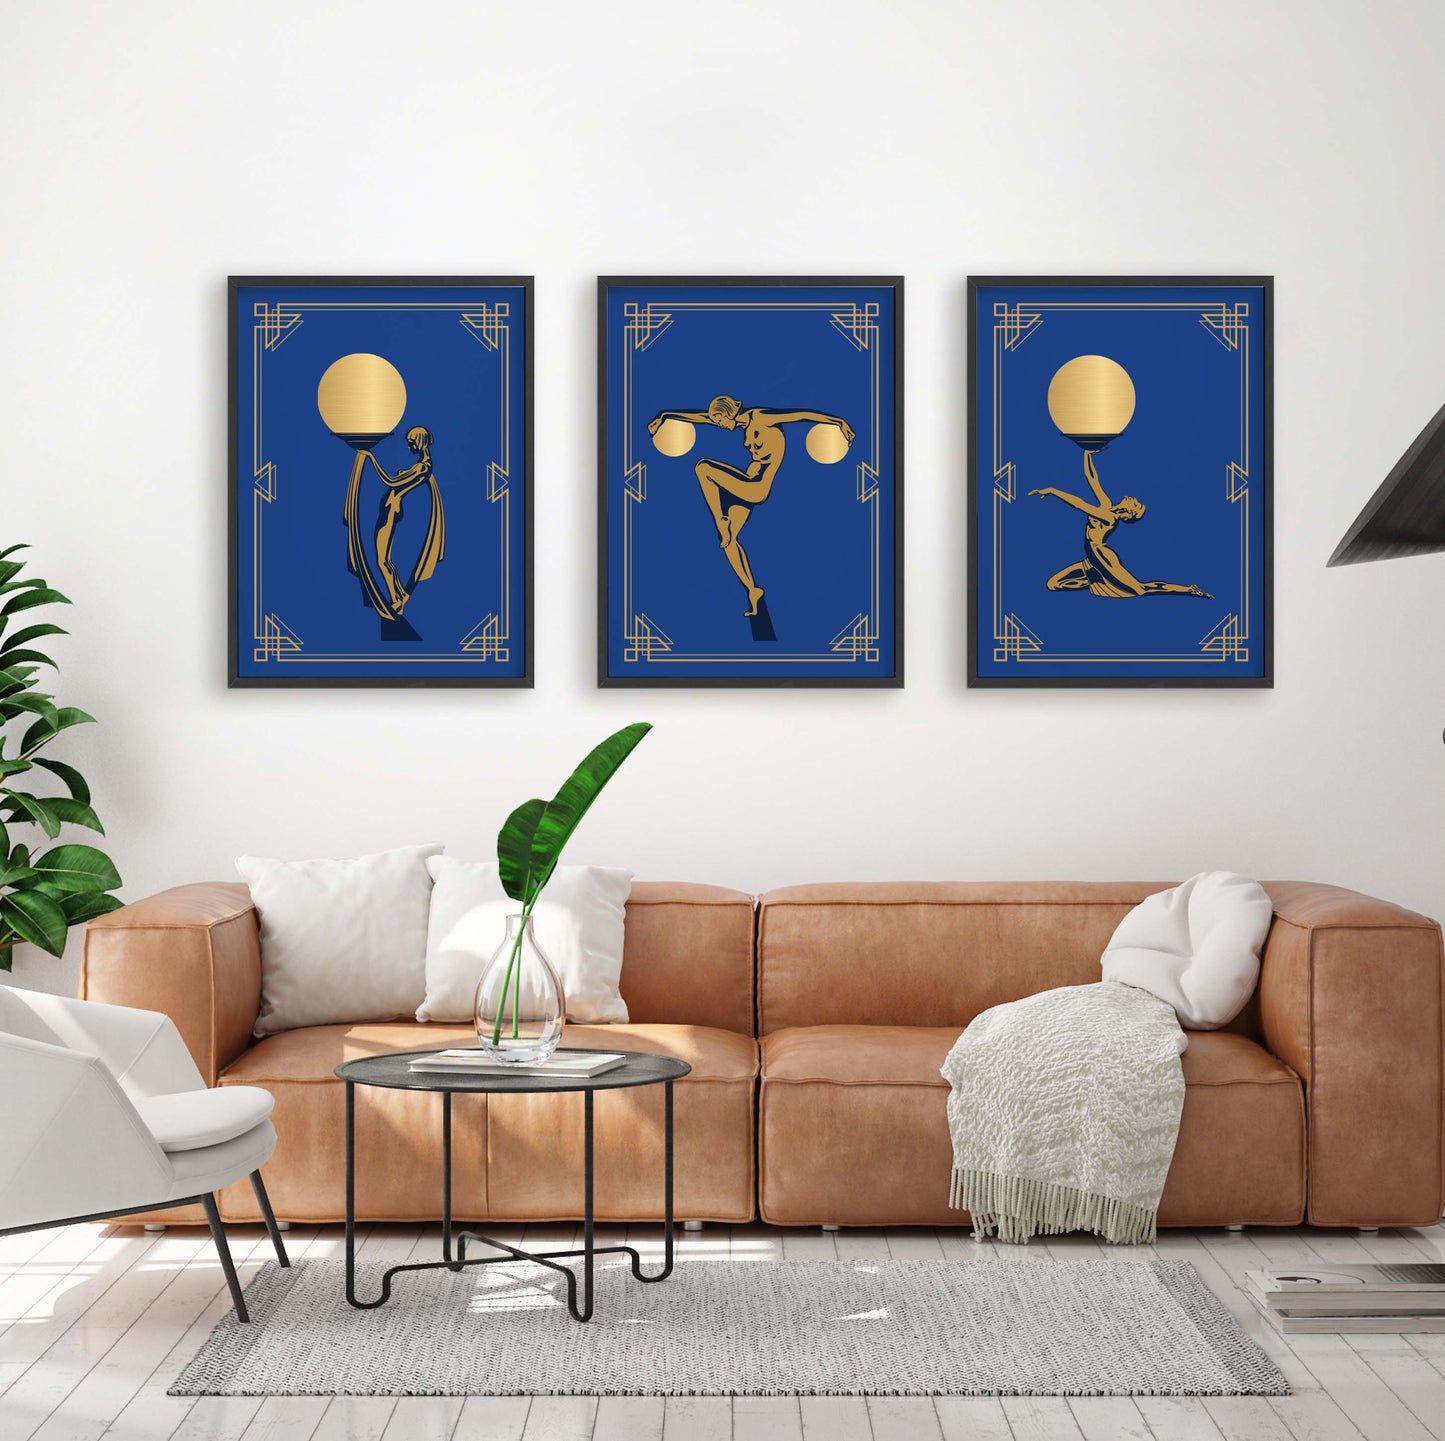 Art deco woman prints in blue and gold